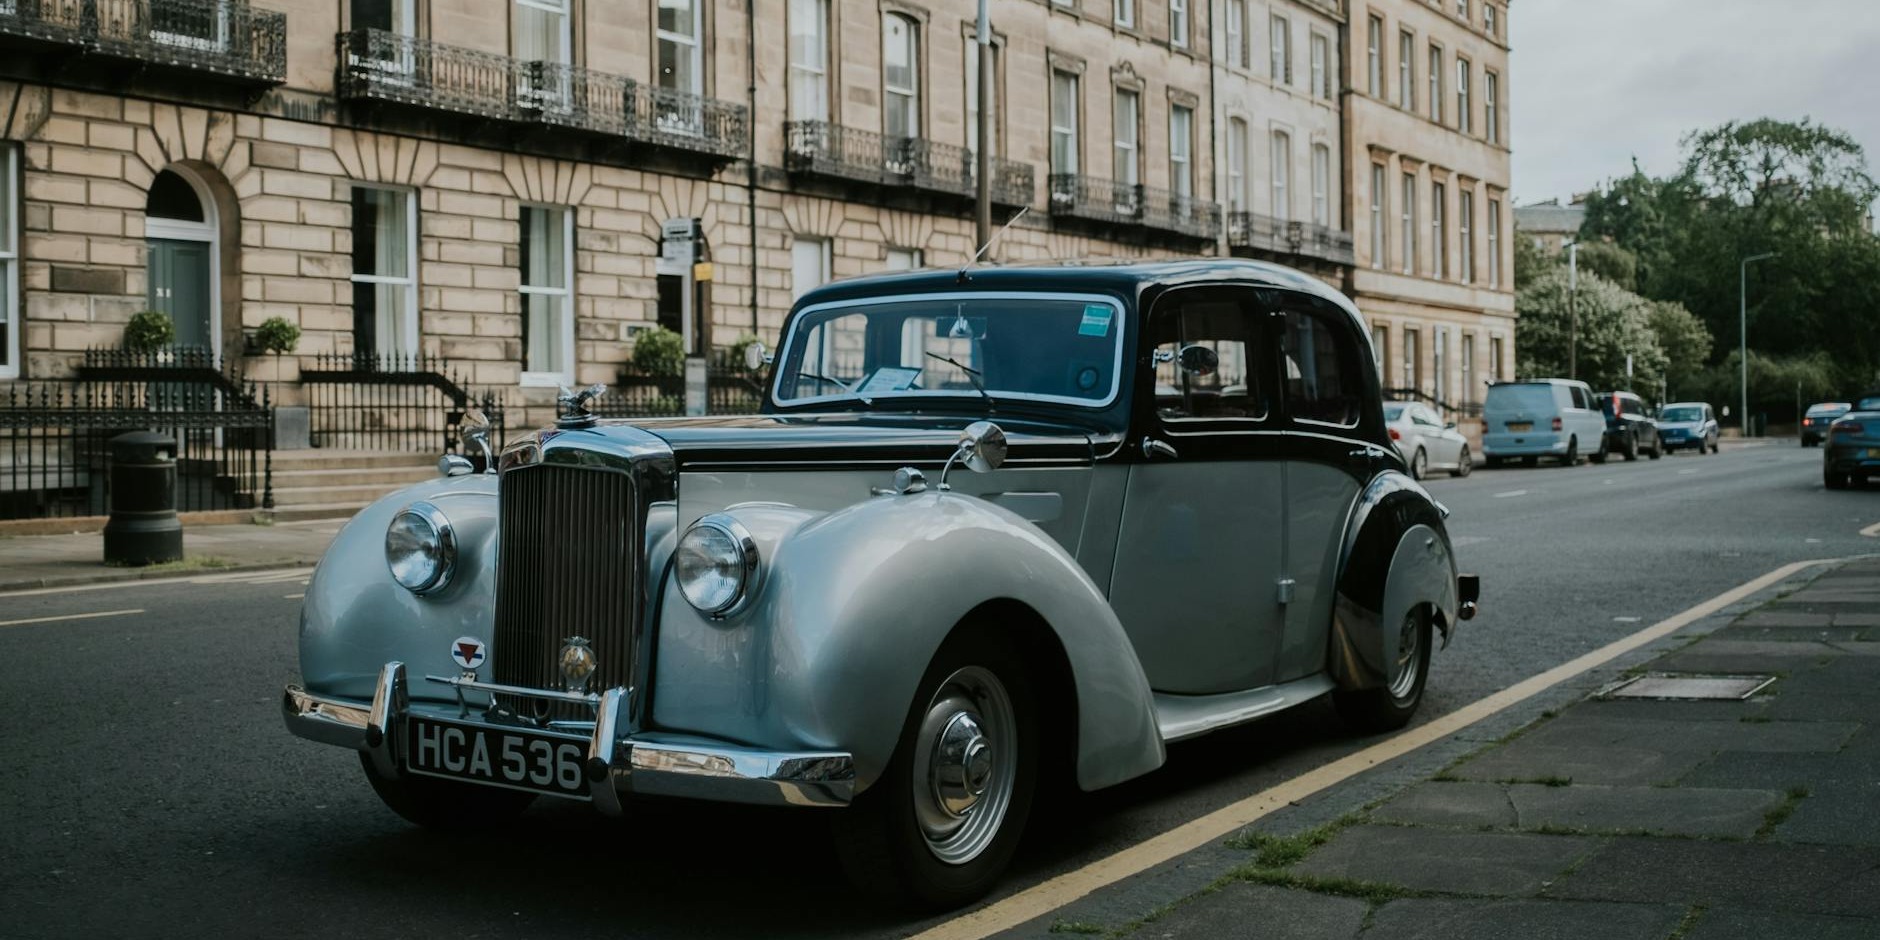 Experience Wales in Style: Why a Rolls Royce Rental Elevates Your Tour